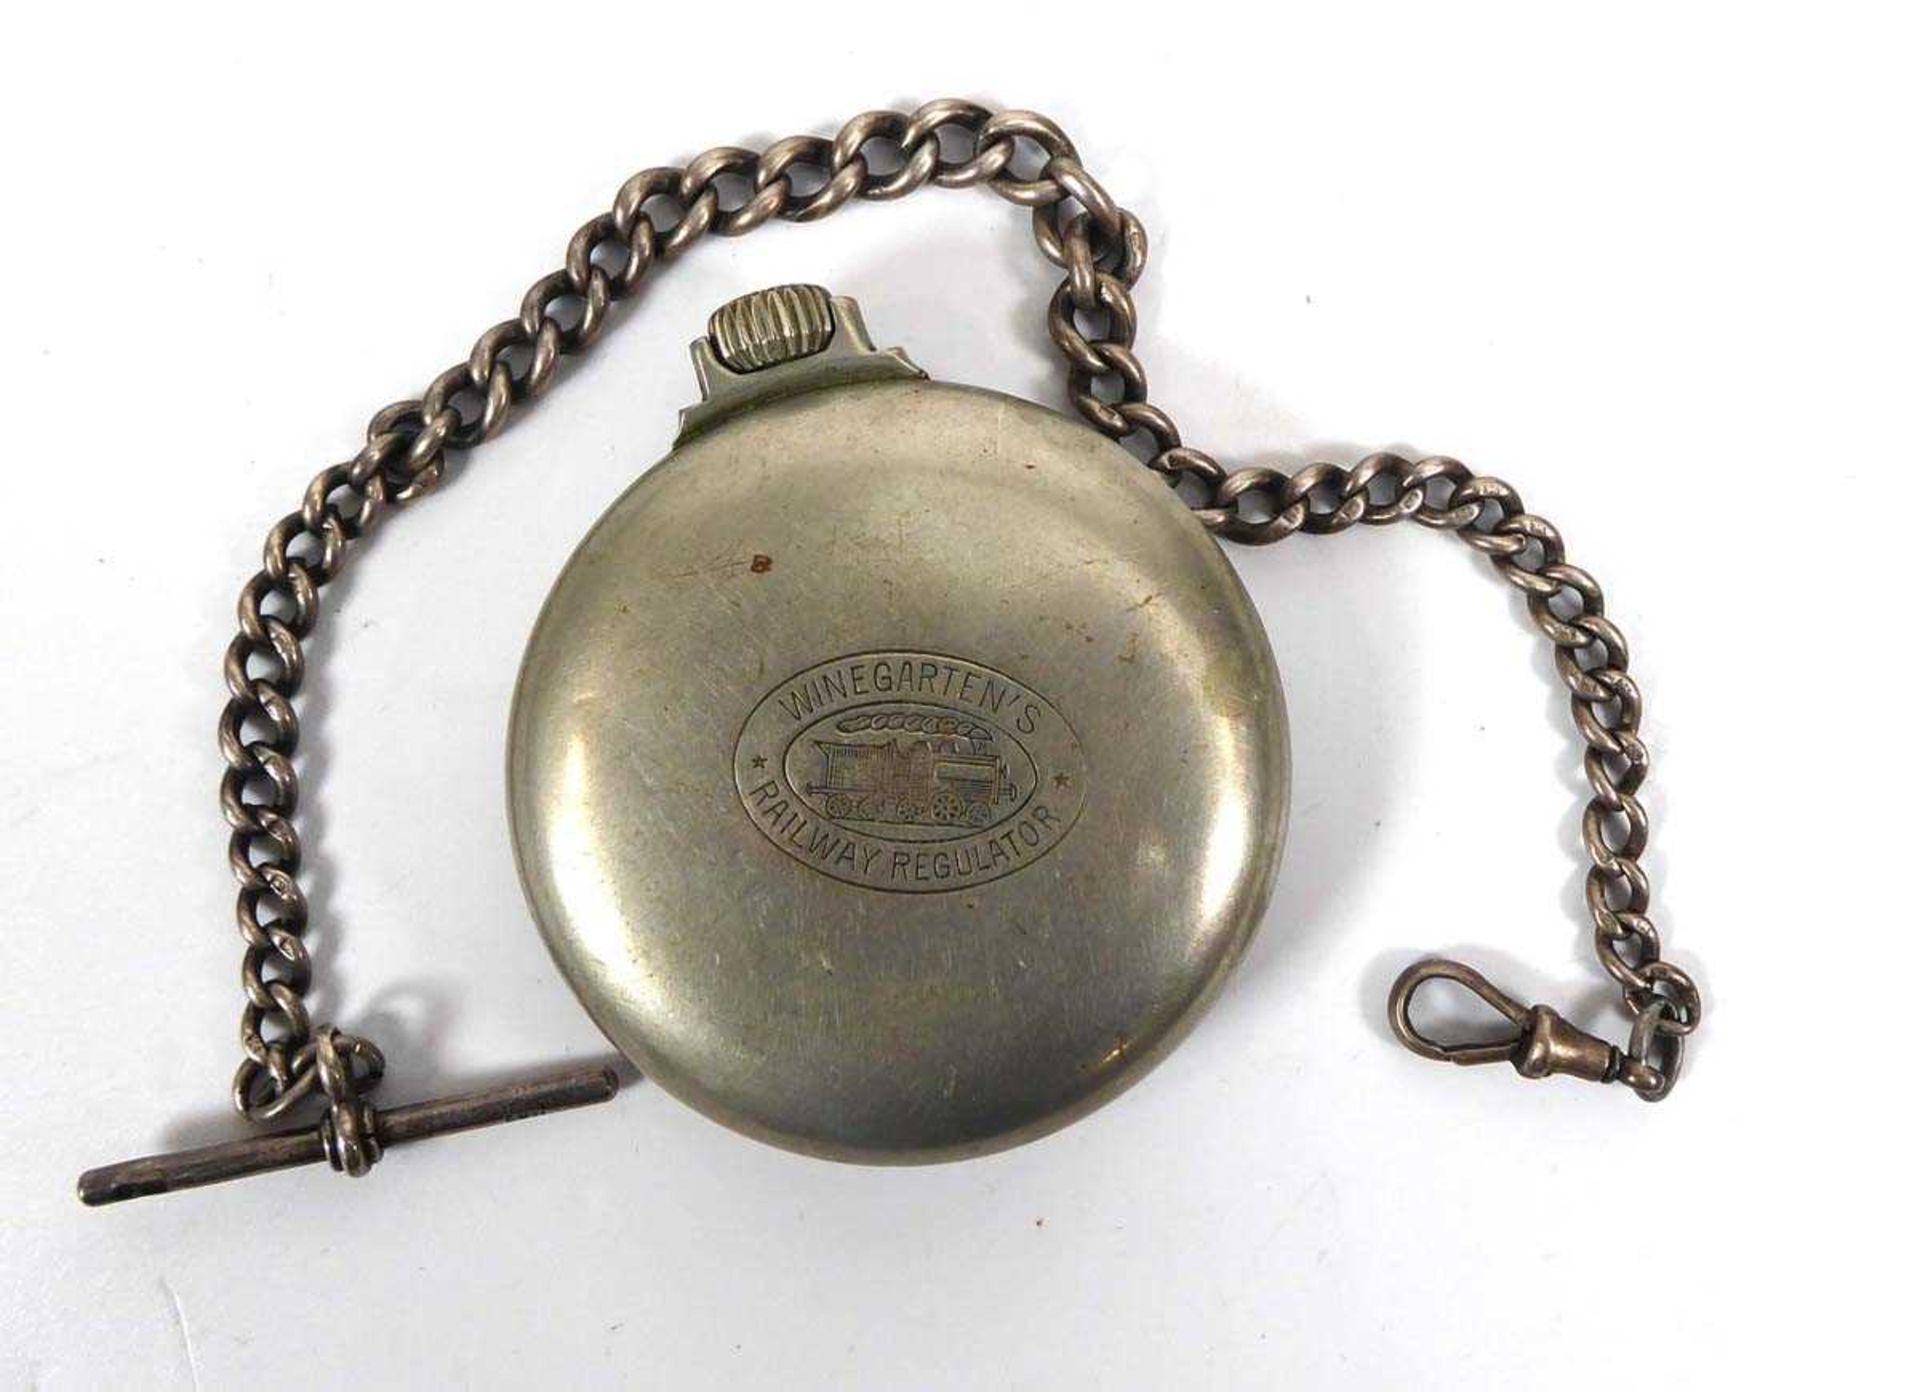 A base metal open face Railway Regulator pocket watch by Winegarten's, the white enamel dial with - Image 2 of 2